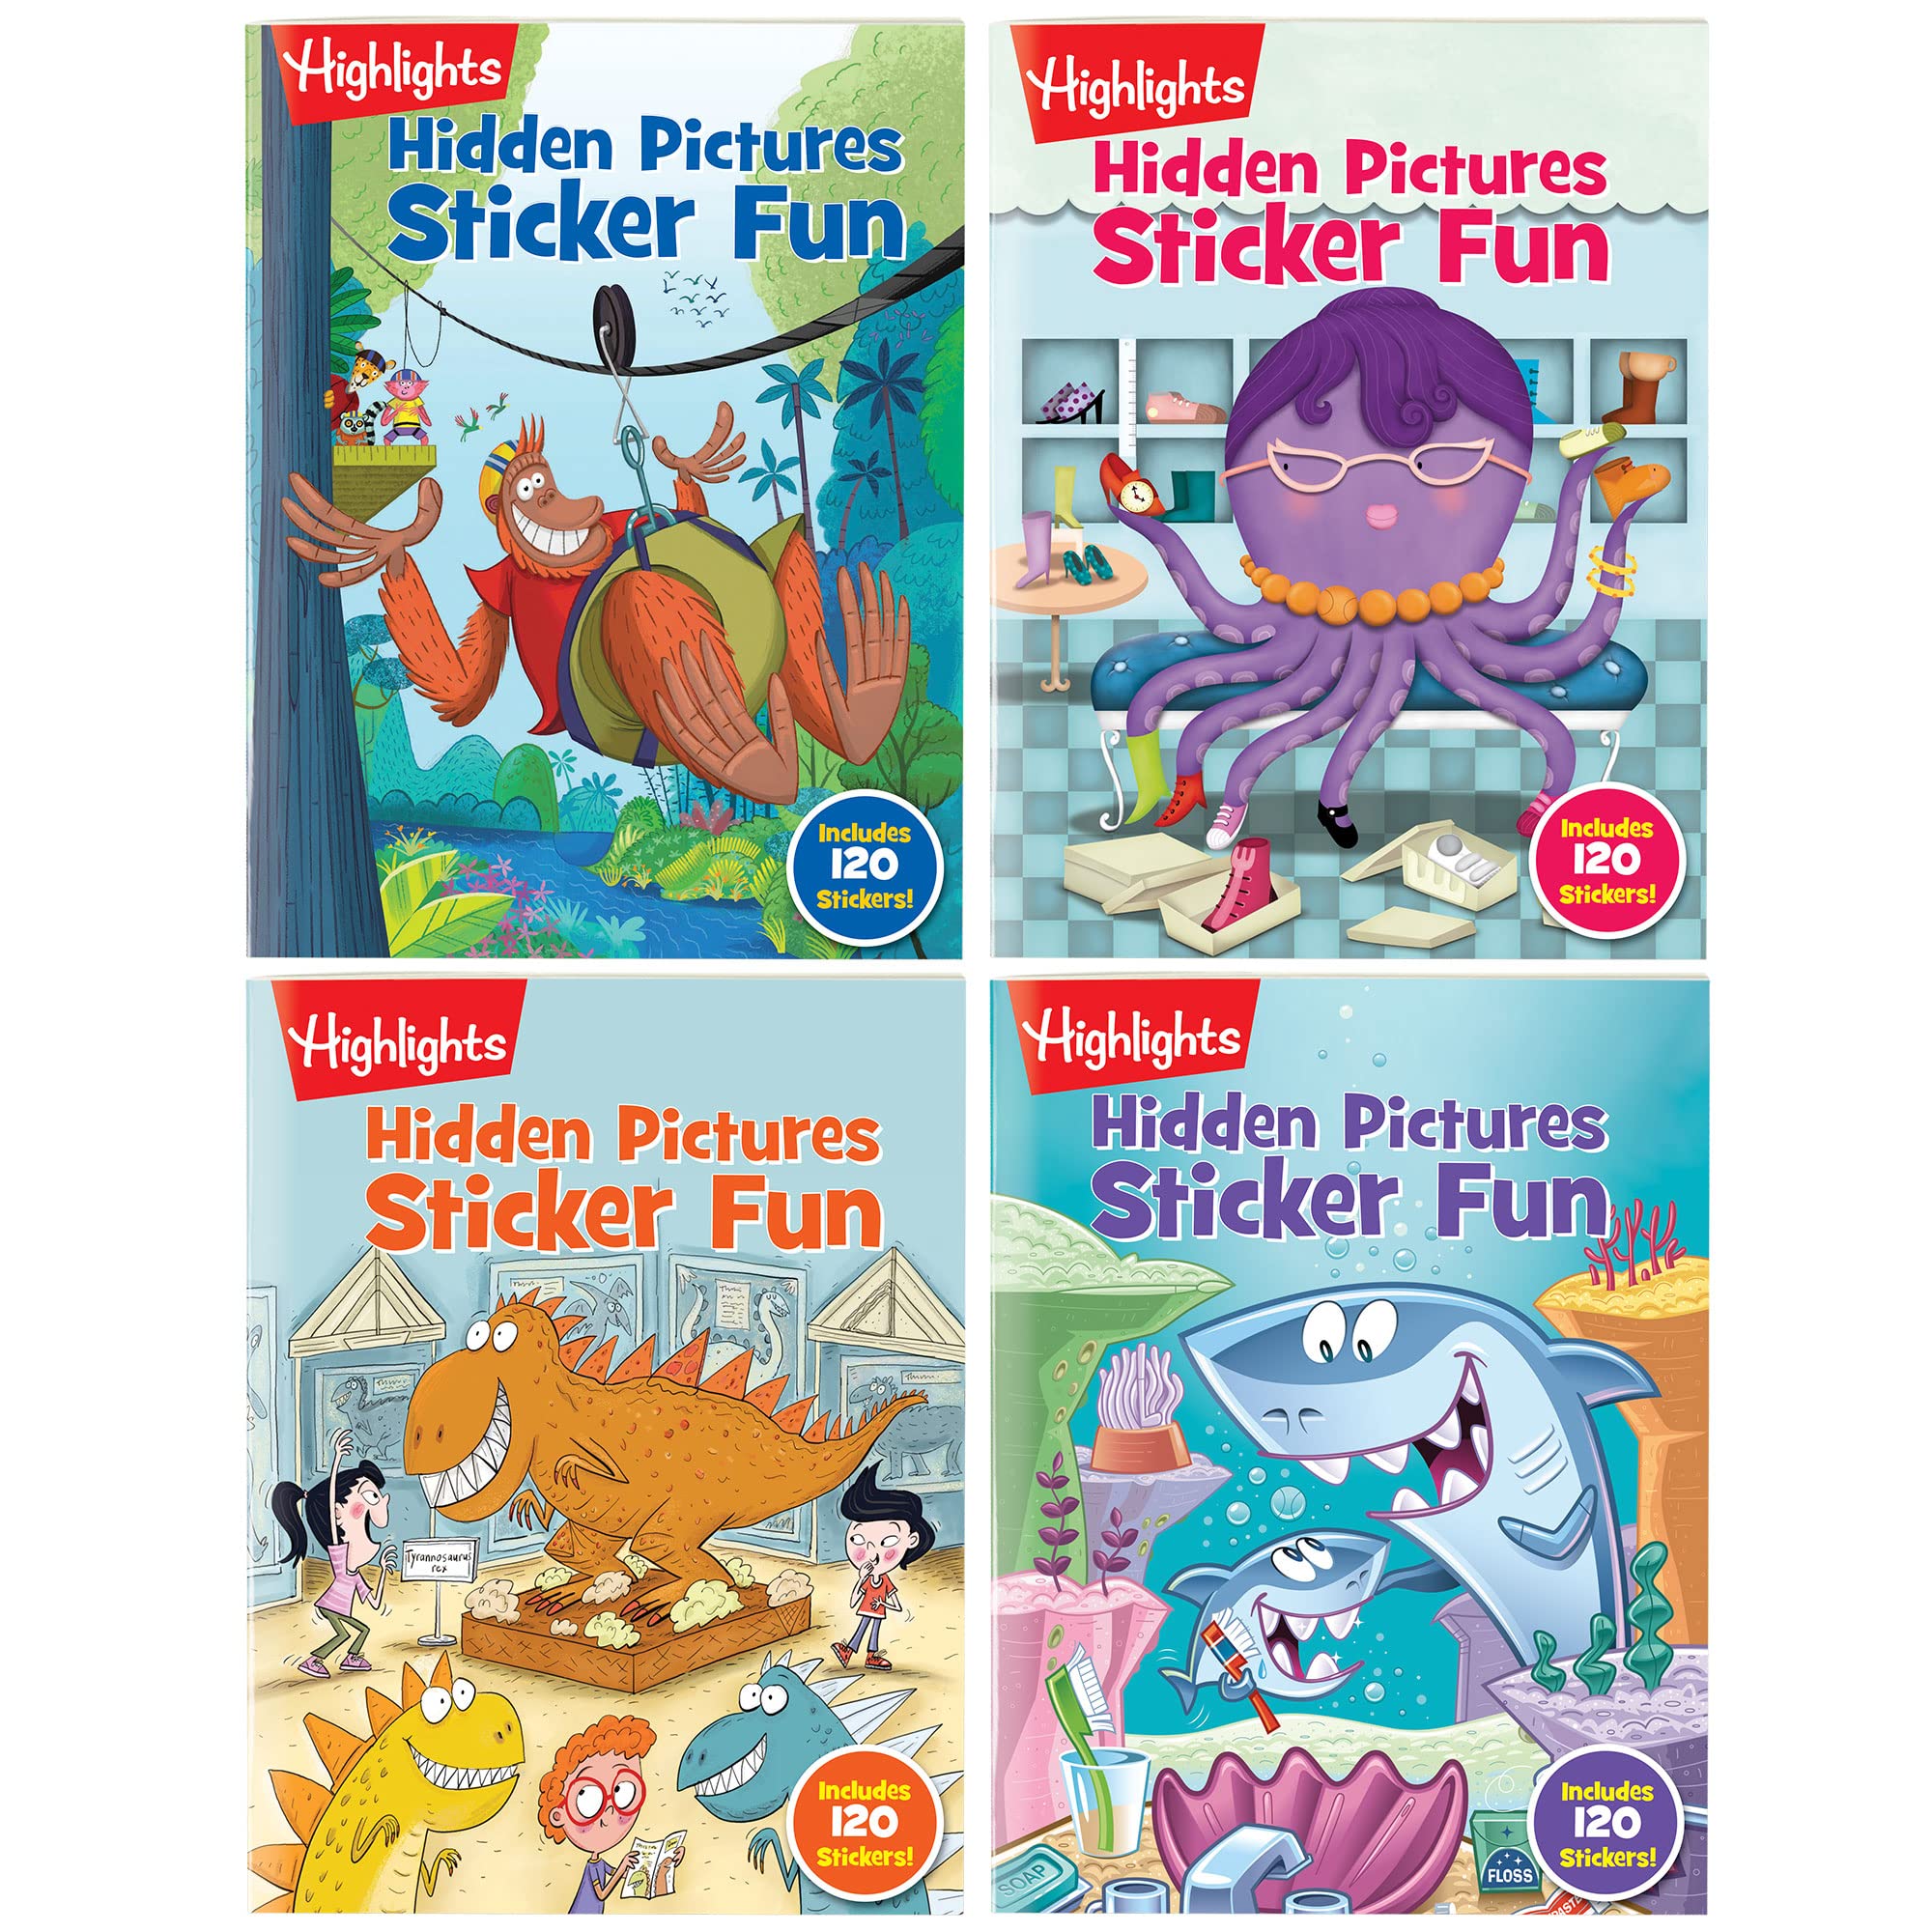 Highlights for Children Hidden Pictures Sticker Fun Sticker Books for Kids Ages 3-6, 4-Pack, 64 Pages - Volume 1